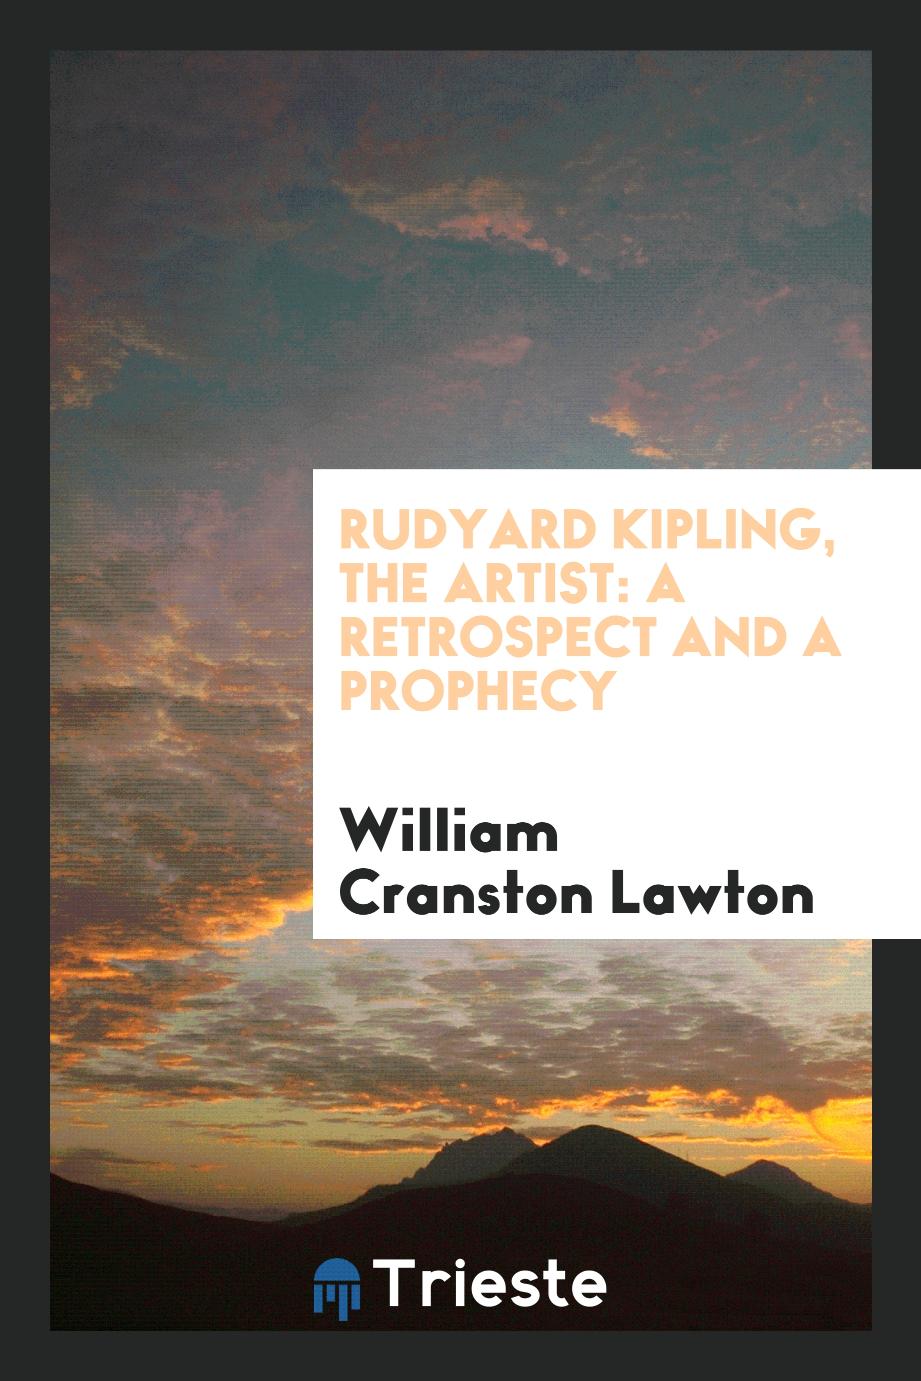 Rudyard Kipling, the artist: a retrospect and a prophecy